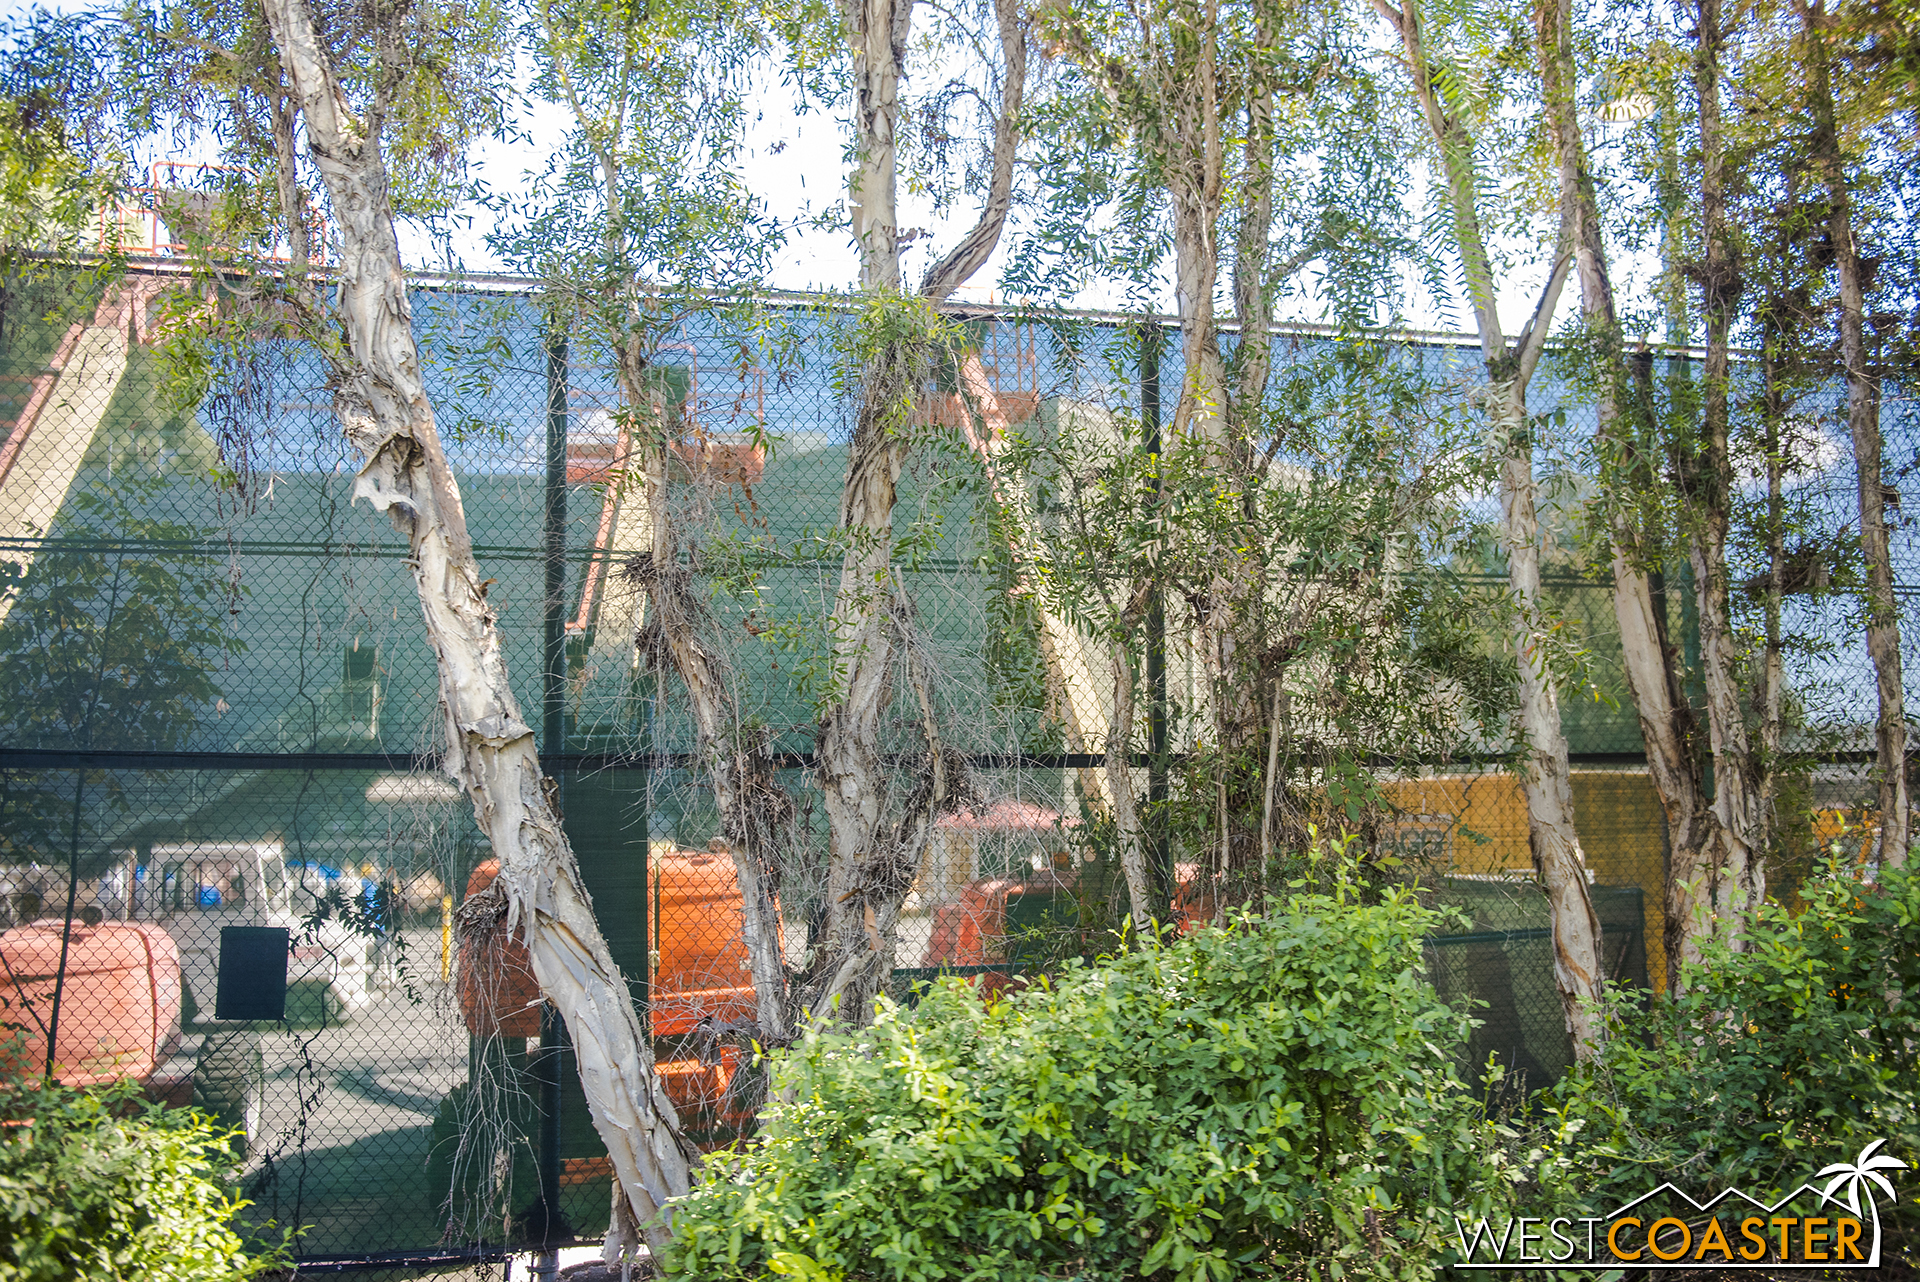  OK, so these are only shots of backstage and a tiny bit of the back of "Star Wars" Land through the fencing tarp along the tram route.&nbsp; But hey... #EXCLUSIVEPHOTOS!!! 